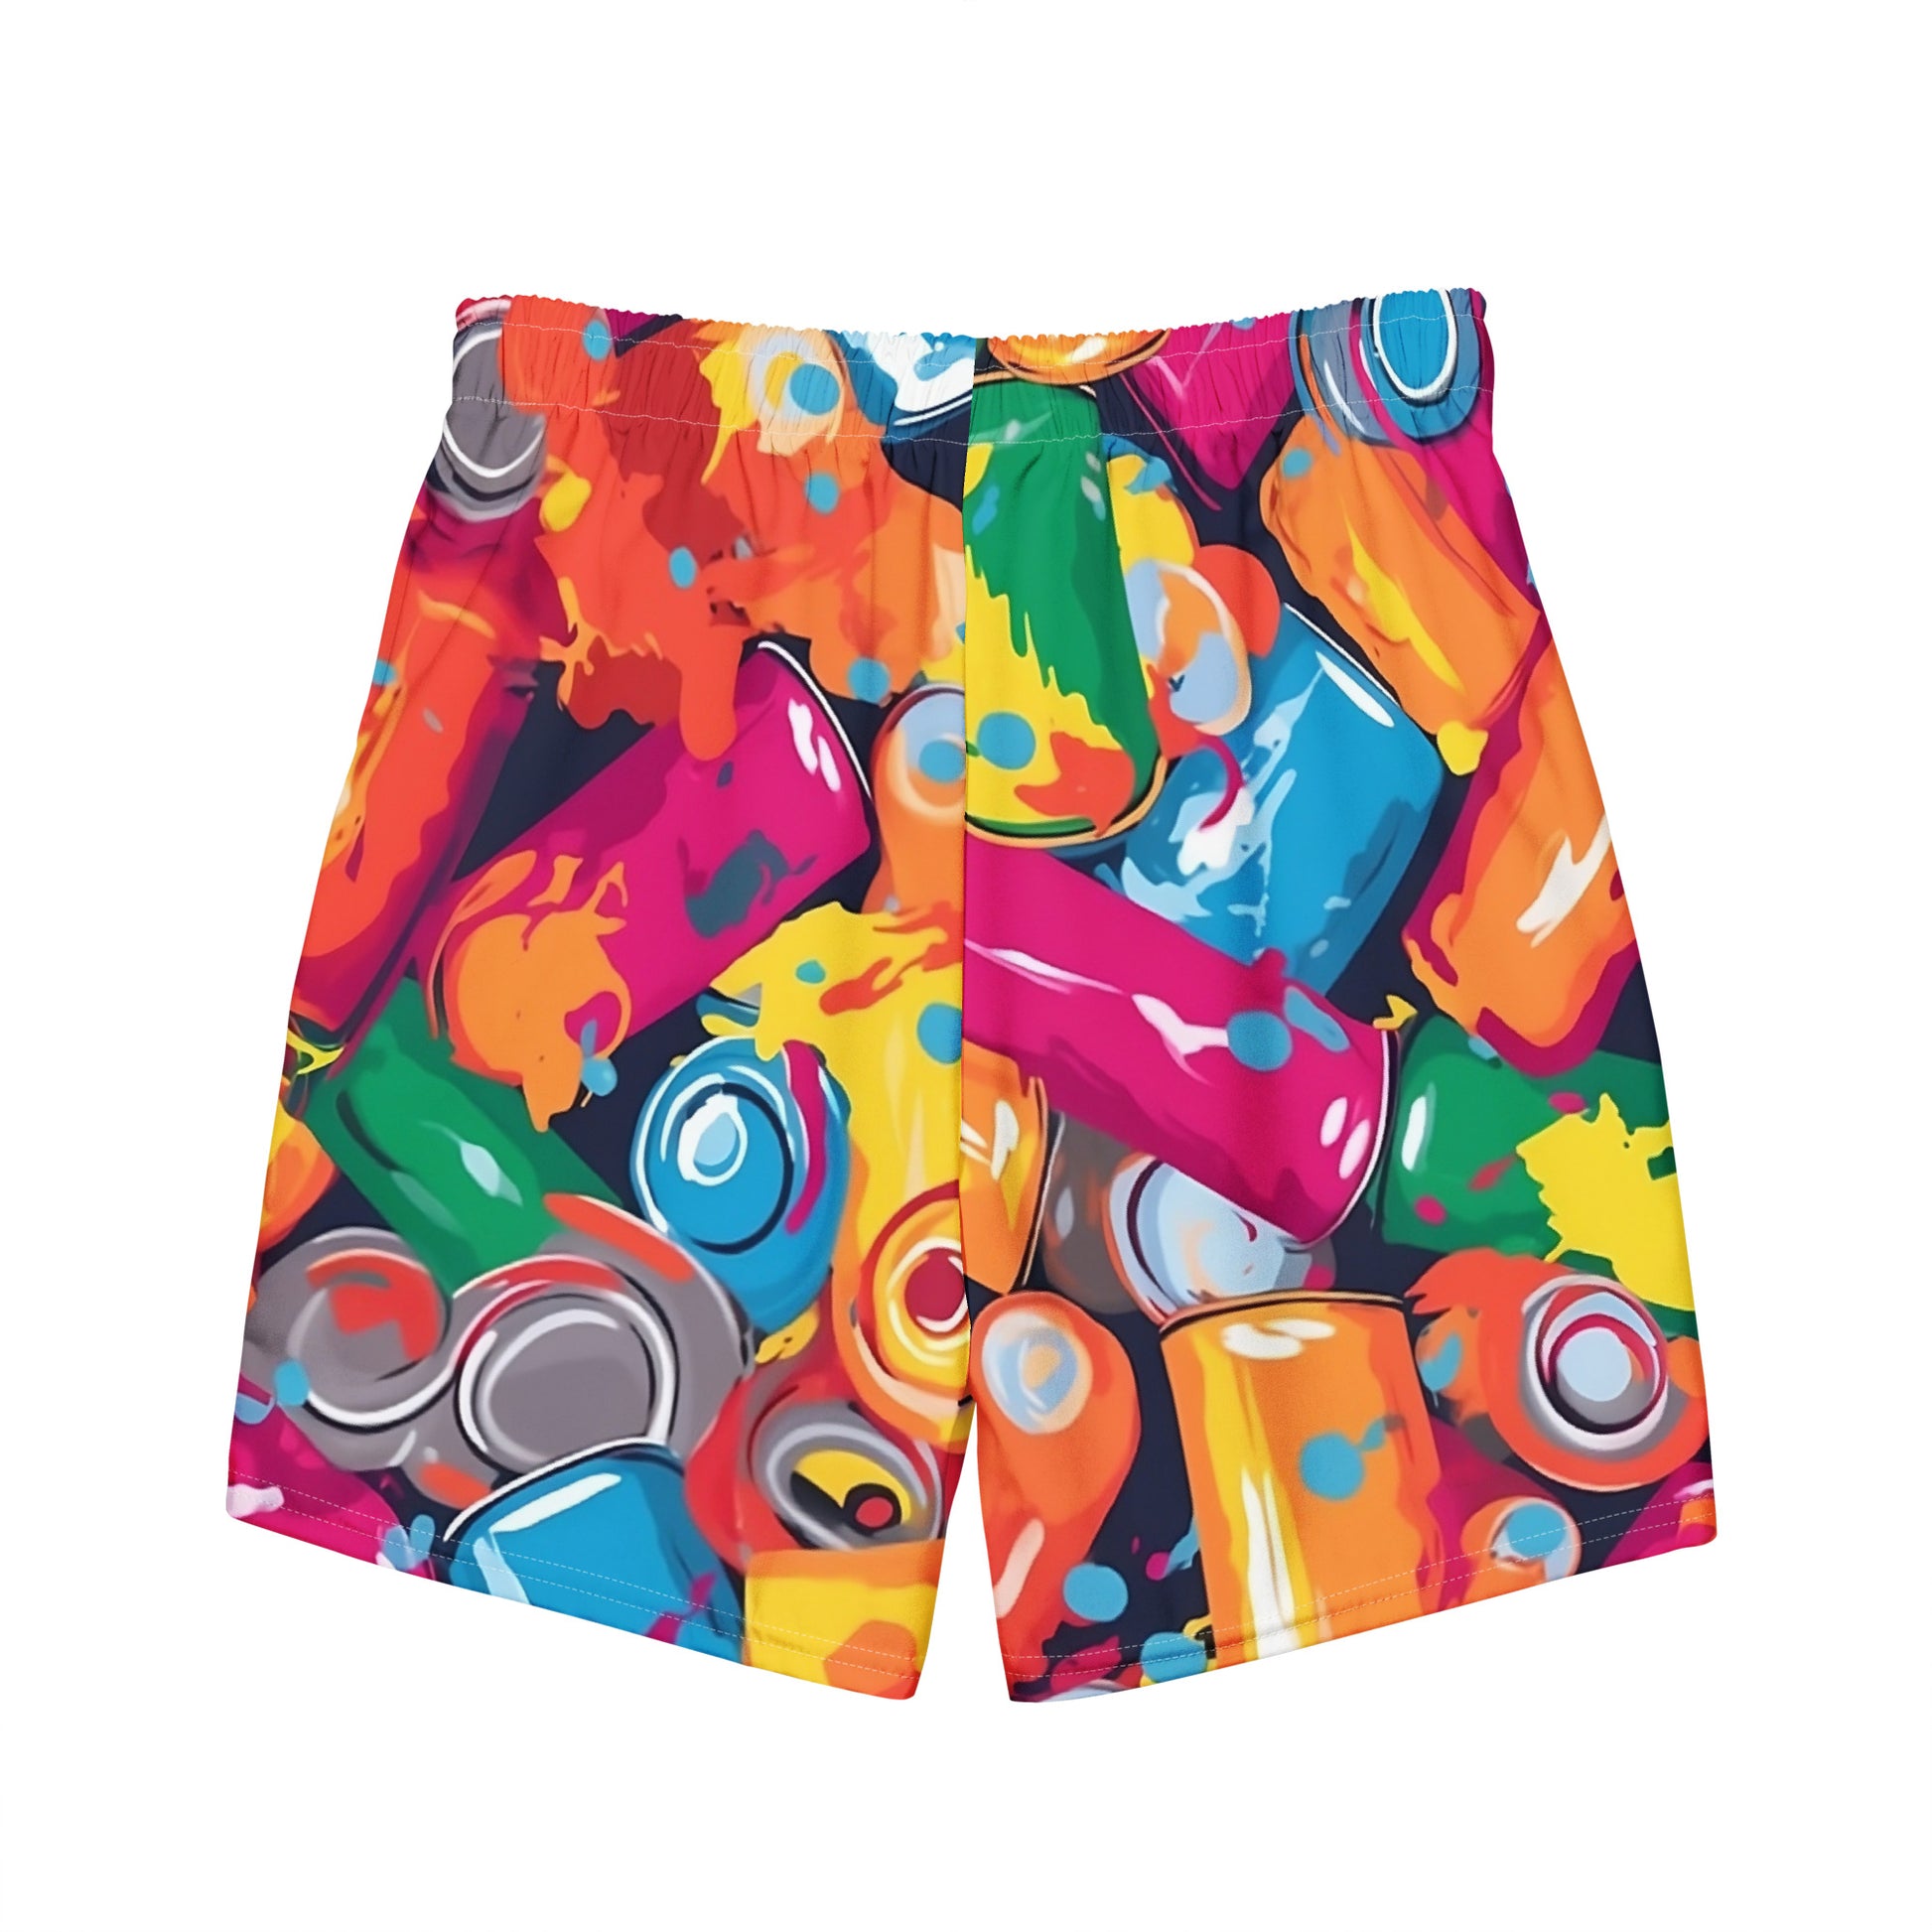 back of spray cans swim shorts by B.Different Clothing independent streetwear inspired by street art graffiti